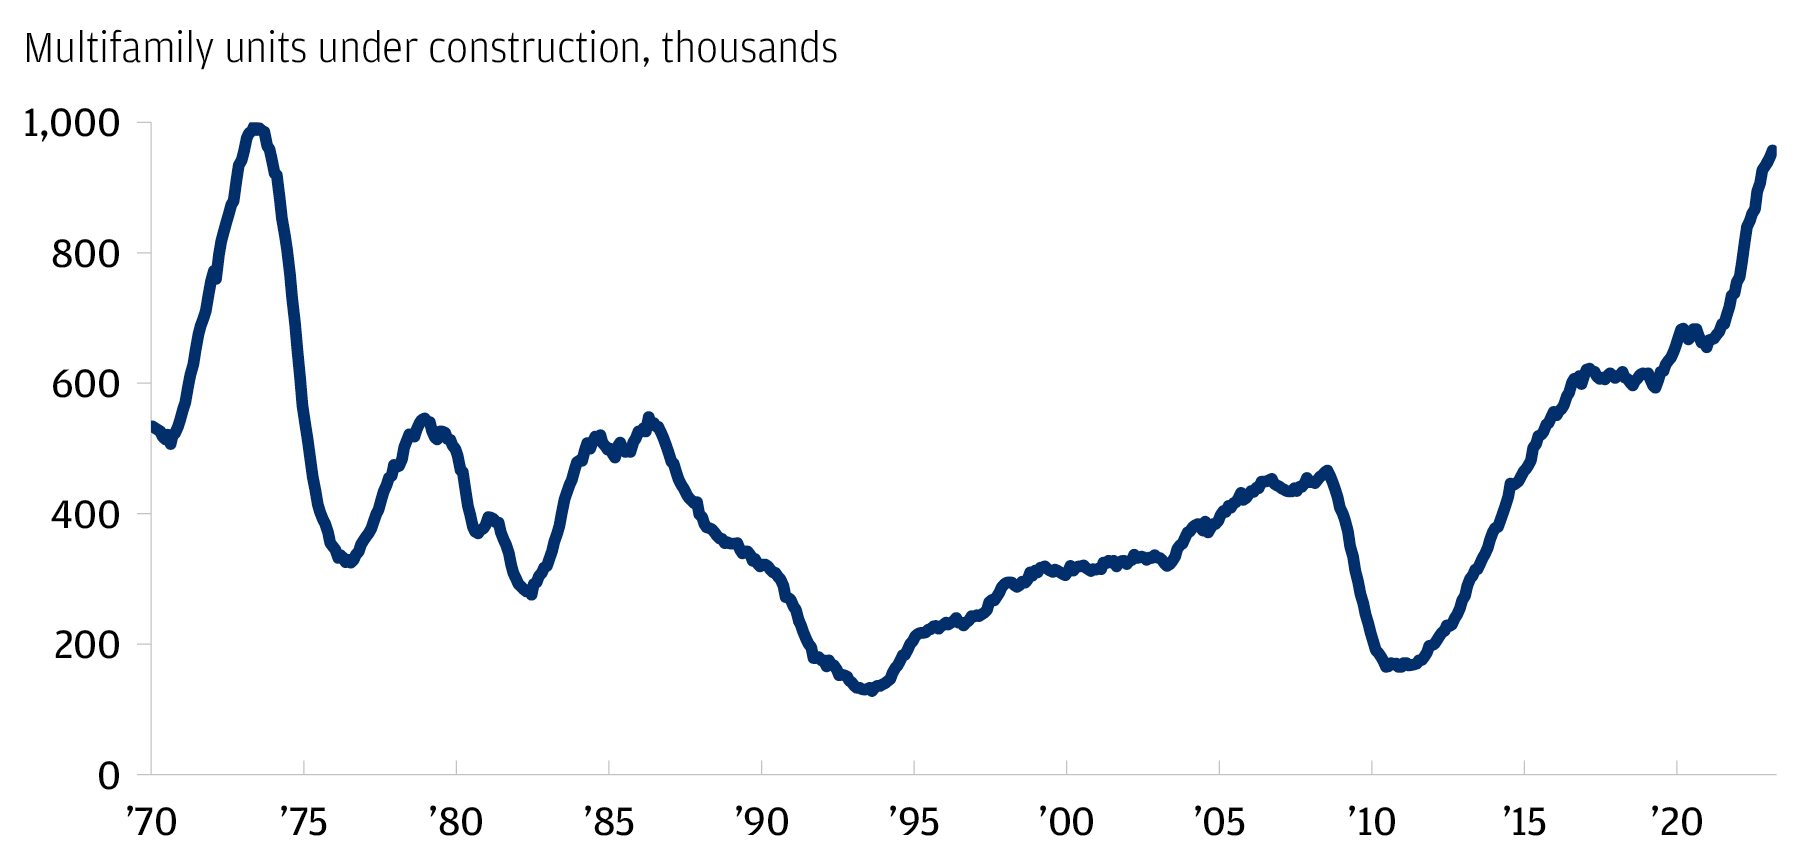 The number of apartments being built in the U.S. is higher than at any time since the 1970s.